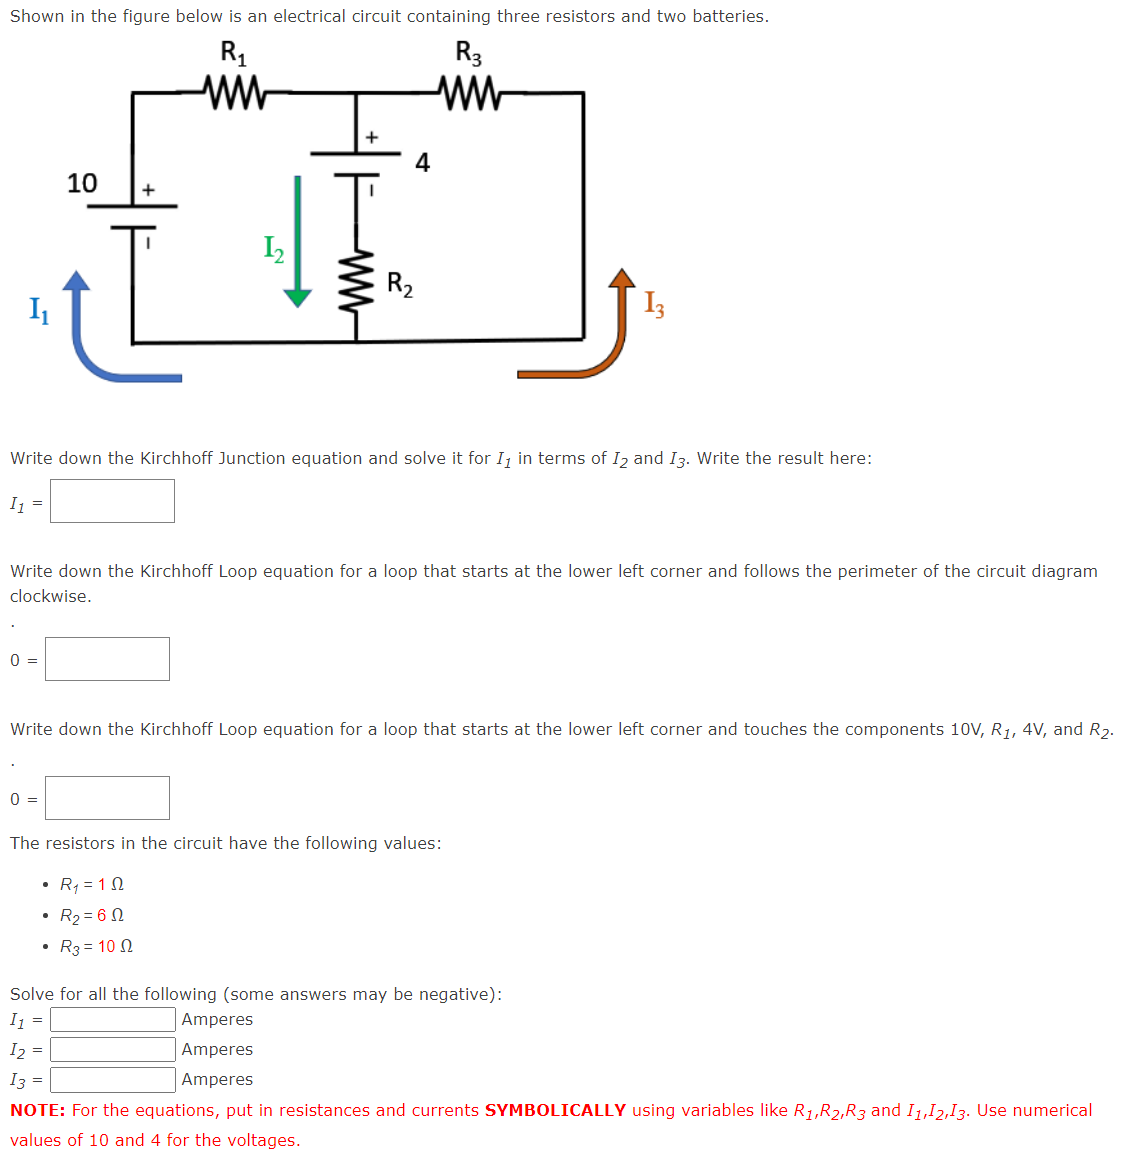 Shown in the figure below is an electrical circuit containing three resistors and two batteries.
R₁
ww
I₁
0 =
10
▪
+
L
0 =
1₂
+
Write down the Kirchhoff Junction equation and solve it for I, in terms of 12 and 13. Write the result here:
I₁ =
4
Write down the Kirchhoff Loop equation for a loop that starts at the lower left corner and follows the perimeter of the circuit diagram
clockwise.
R₂
R3
ww
Write down the Kirchhoff Loop equation for a loop that starts at the lower left corner and touches the components 10V, R₁, 4V, and R₂.
Amperes
Amperes
Amperes
The resistors in the circuit have the following values:
• R₁ = 192
• R₂ = 60
• R3 = 100
Solve for all the following (some answers may be negative):
I₁ =
I2 =
I3 =
NOTE: For the equations, put in resistances and currents SYMBOLICALLY using variables like R₁,R₂,R3 and 11,12,13. Use numerical
values of 10 and 4 for the voltages.